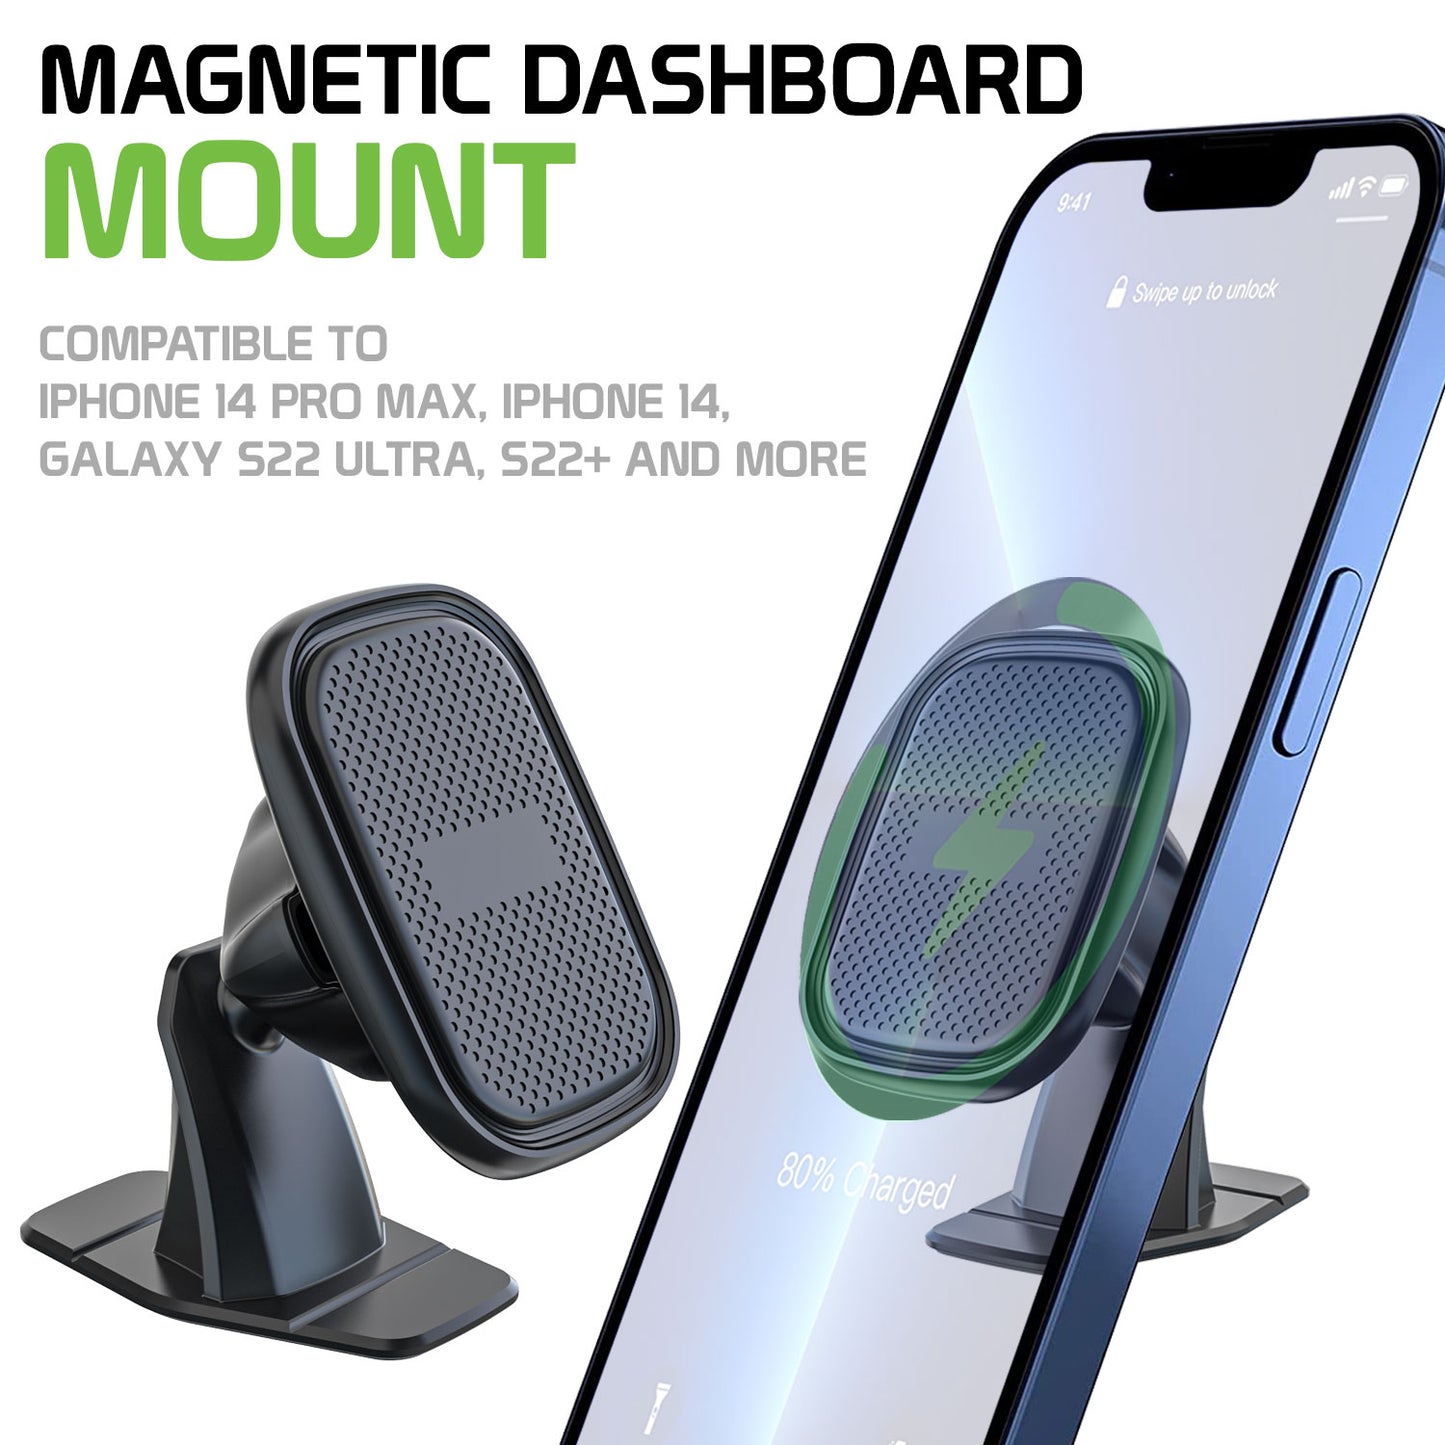 Magnetic Dashboard Mount, Extra Strength Magnetic Dashboard Mount Compatible to iPhone 14 Pro Max Plus, Galaxy Z Flip, Z Fold, Google Pixel, Moto